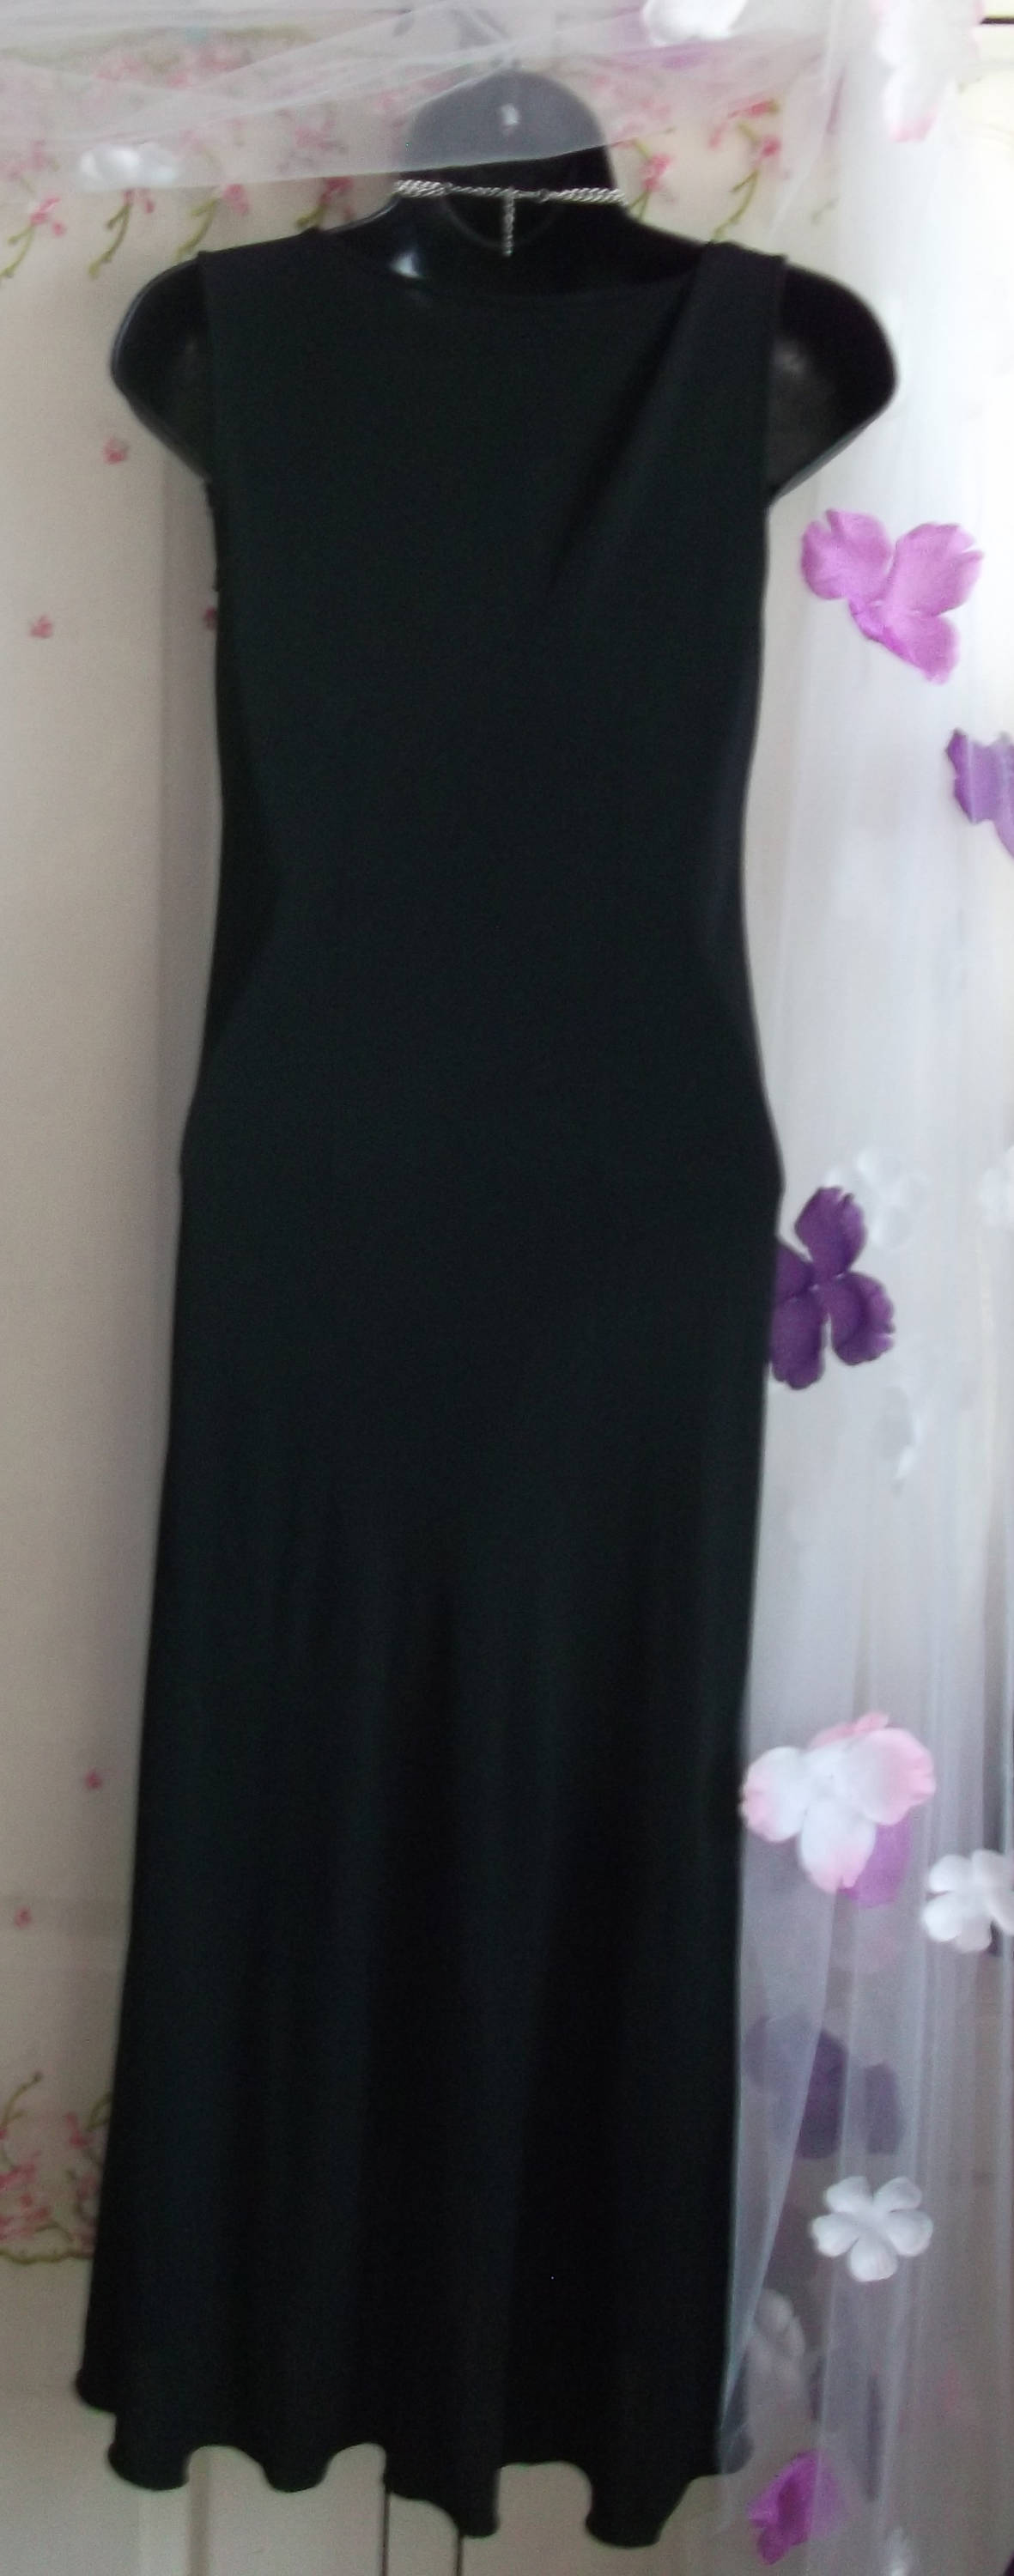 Gorgeous Black Dress By Moschino Cheap and Chic size 10, rose ruffle detail/plunging neckline Wonkey Donkey Bazaar